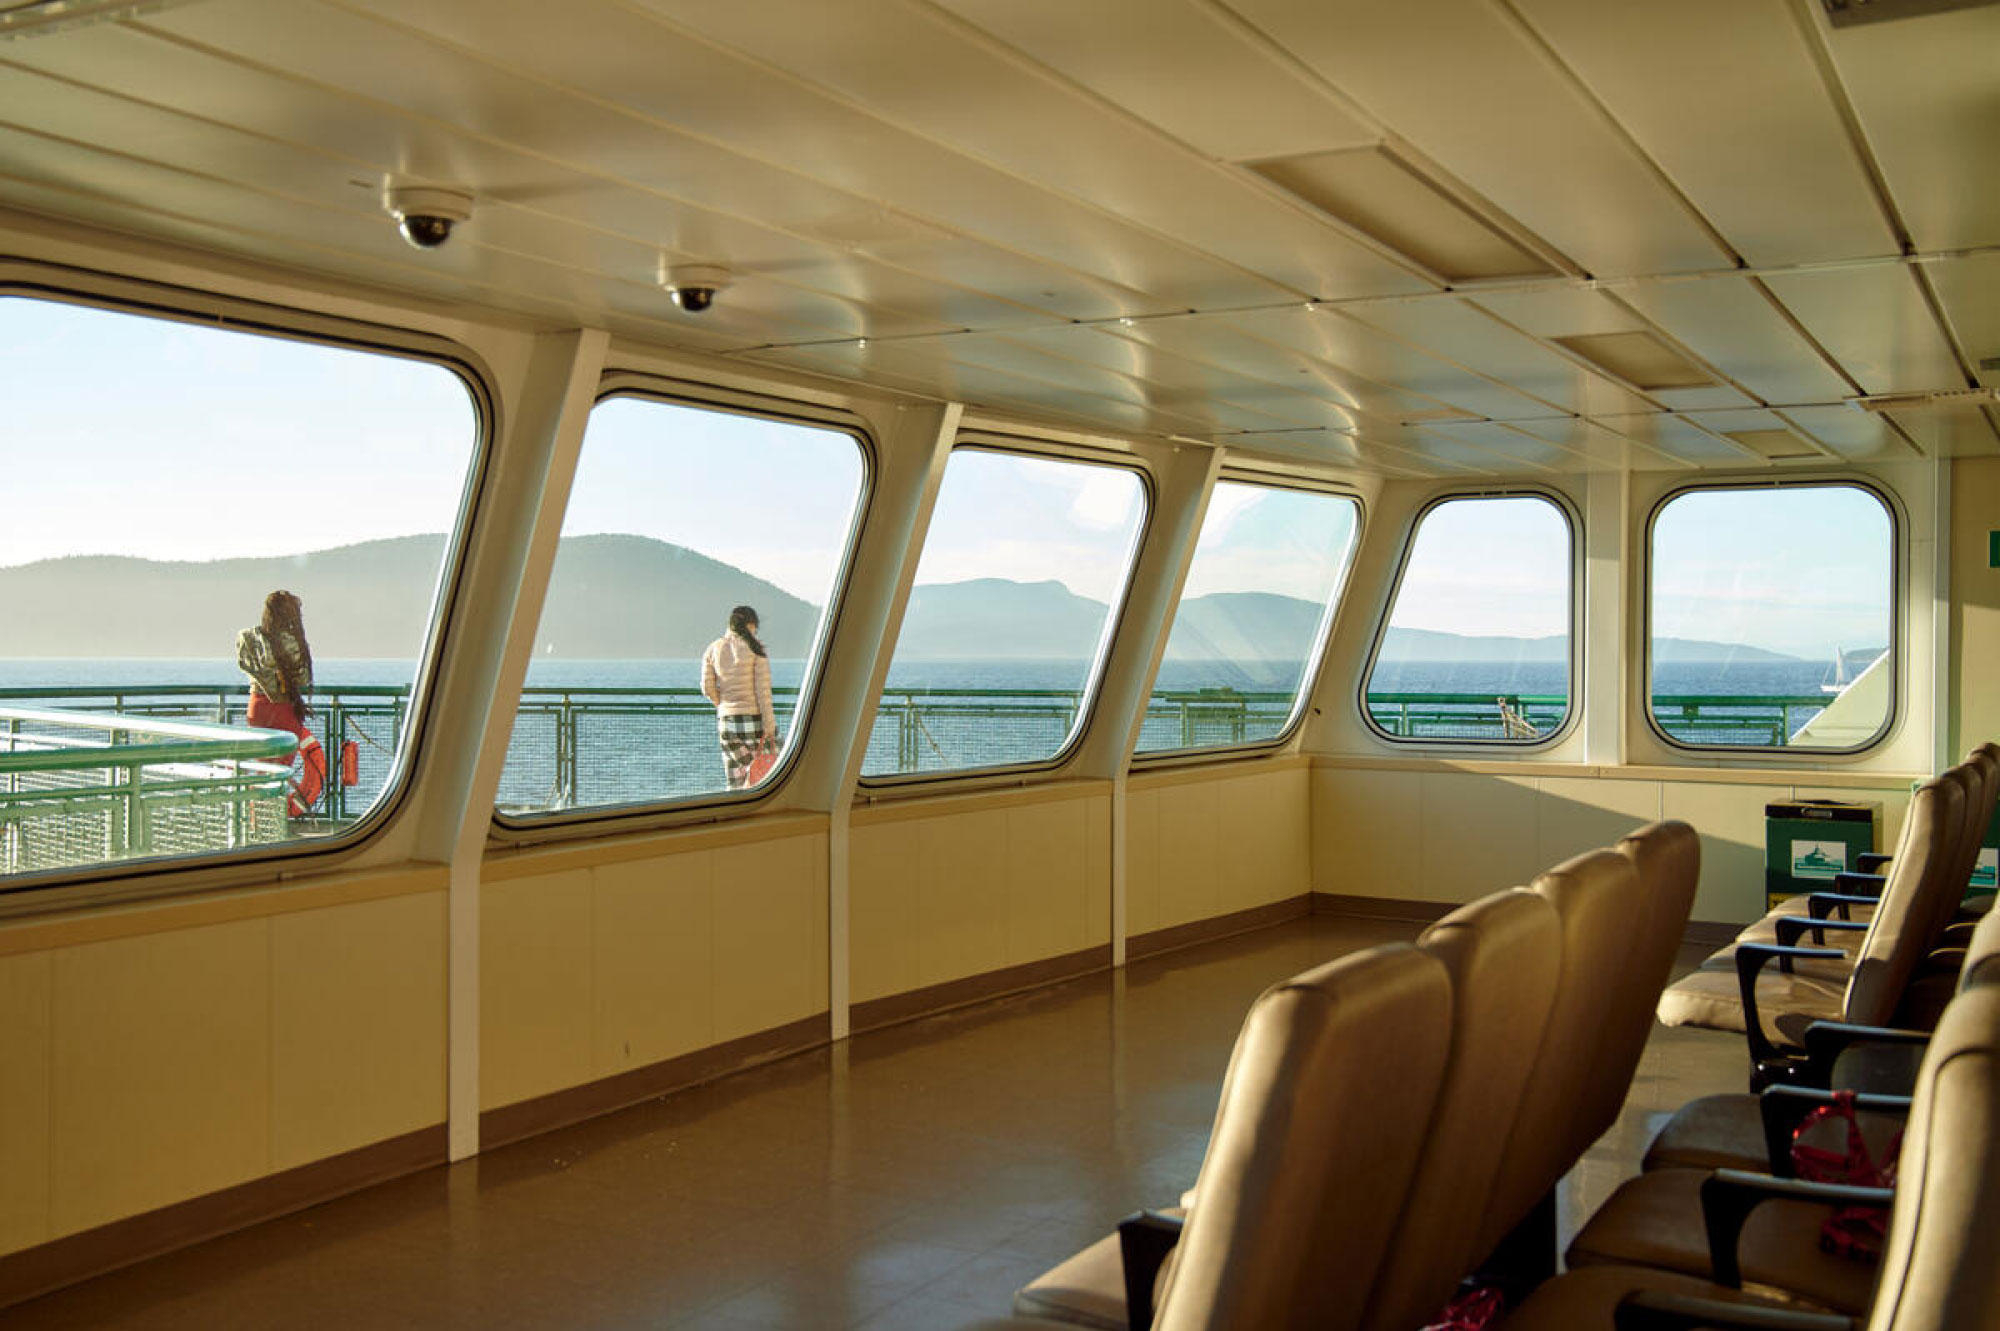 From inside of a ferry, a view to two women standing on the deck and the water beyond.